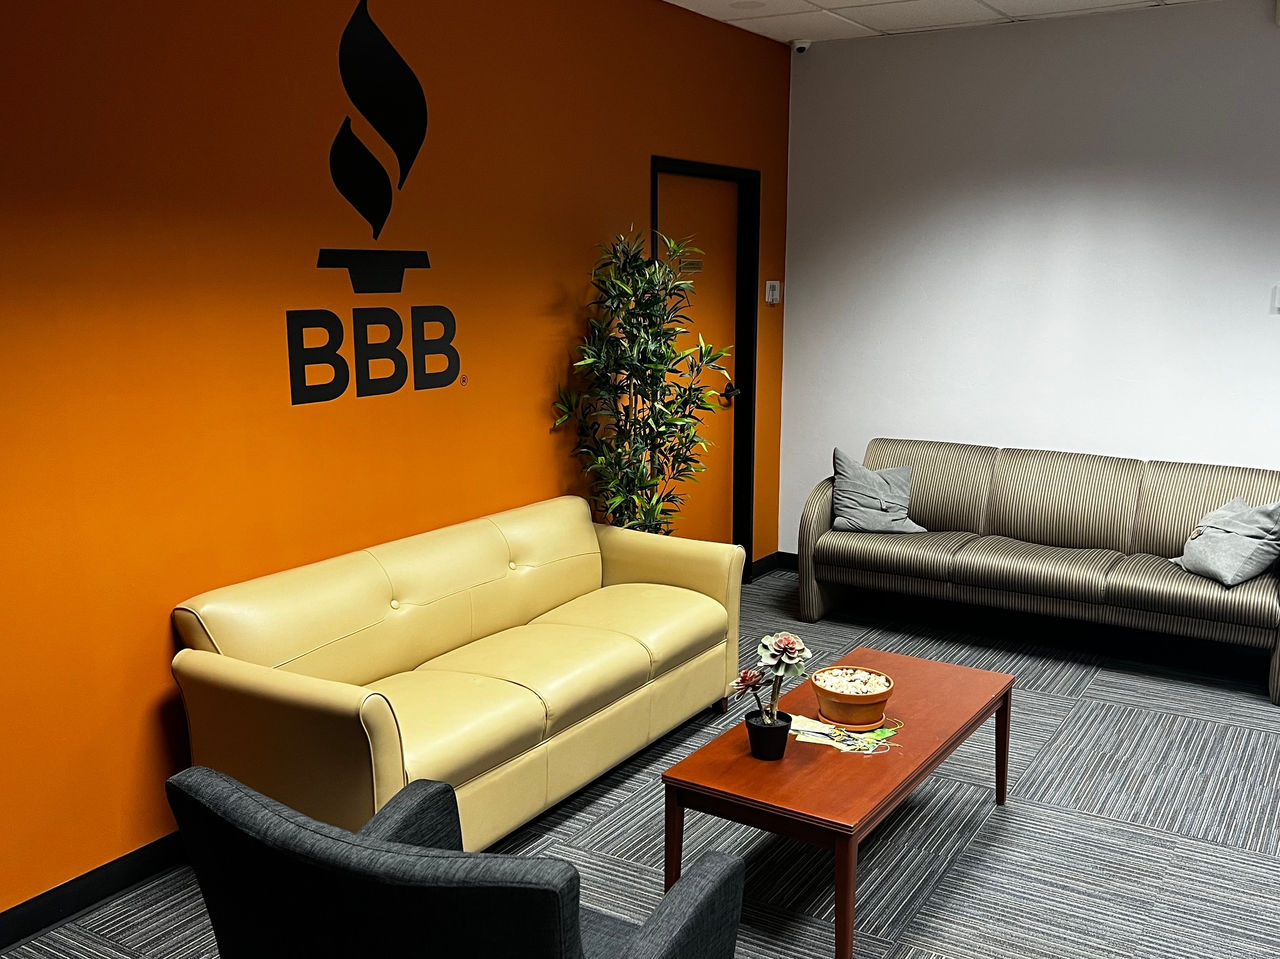 View of Torch Center, burnt orange wall with BBB logo and furniture set